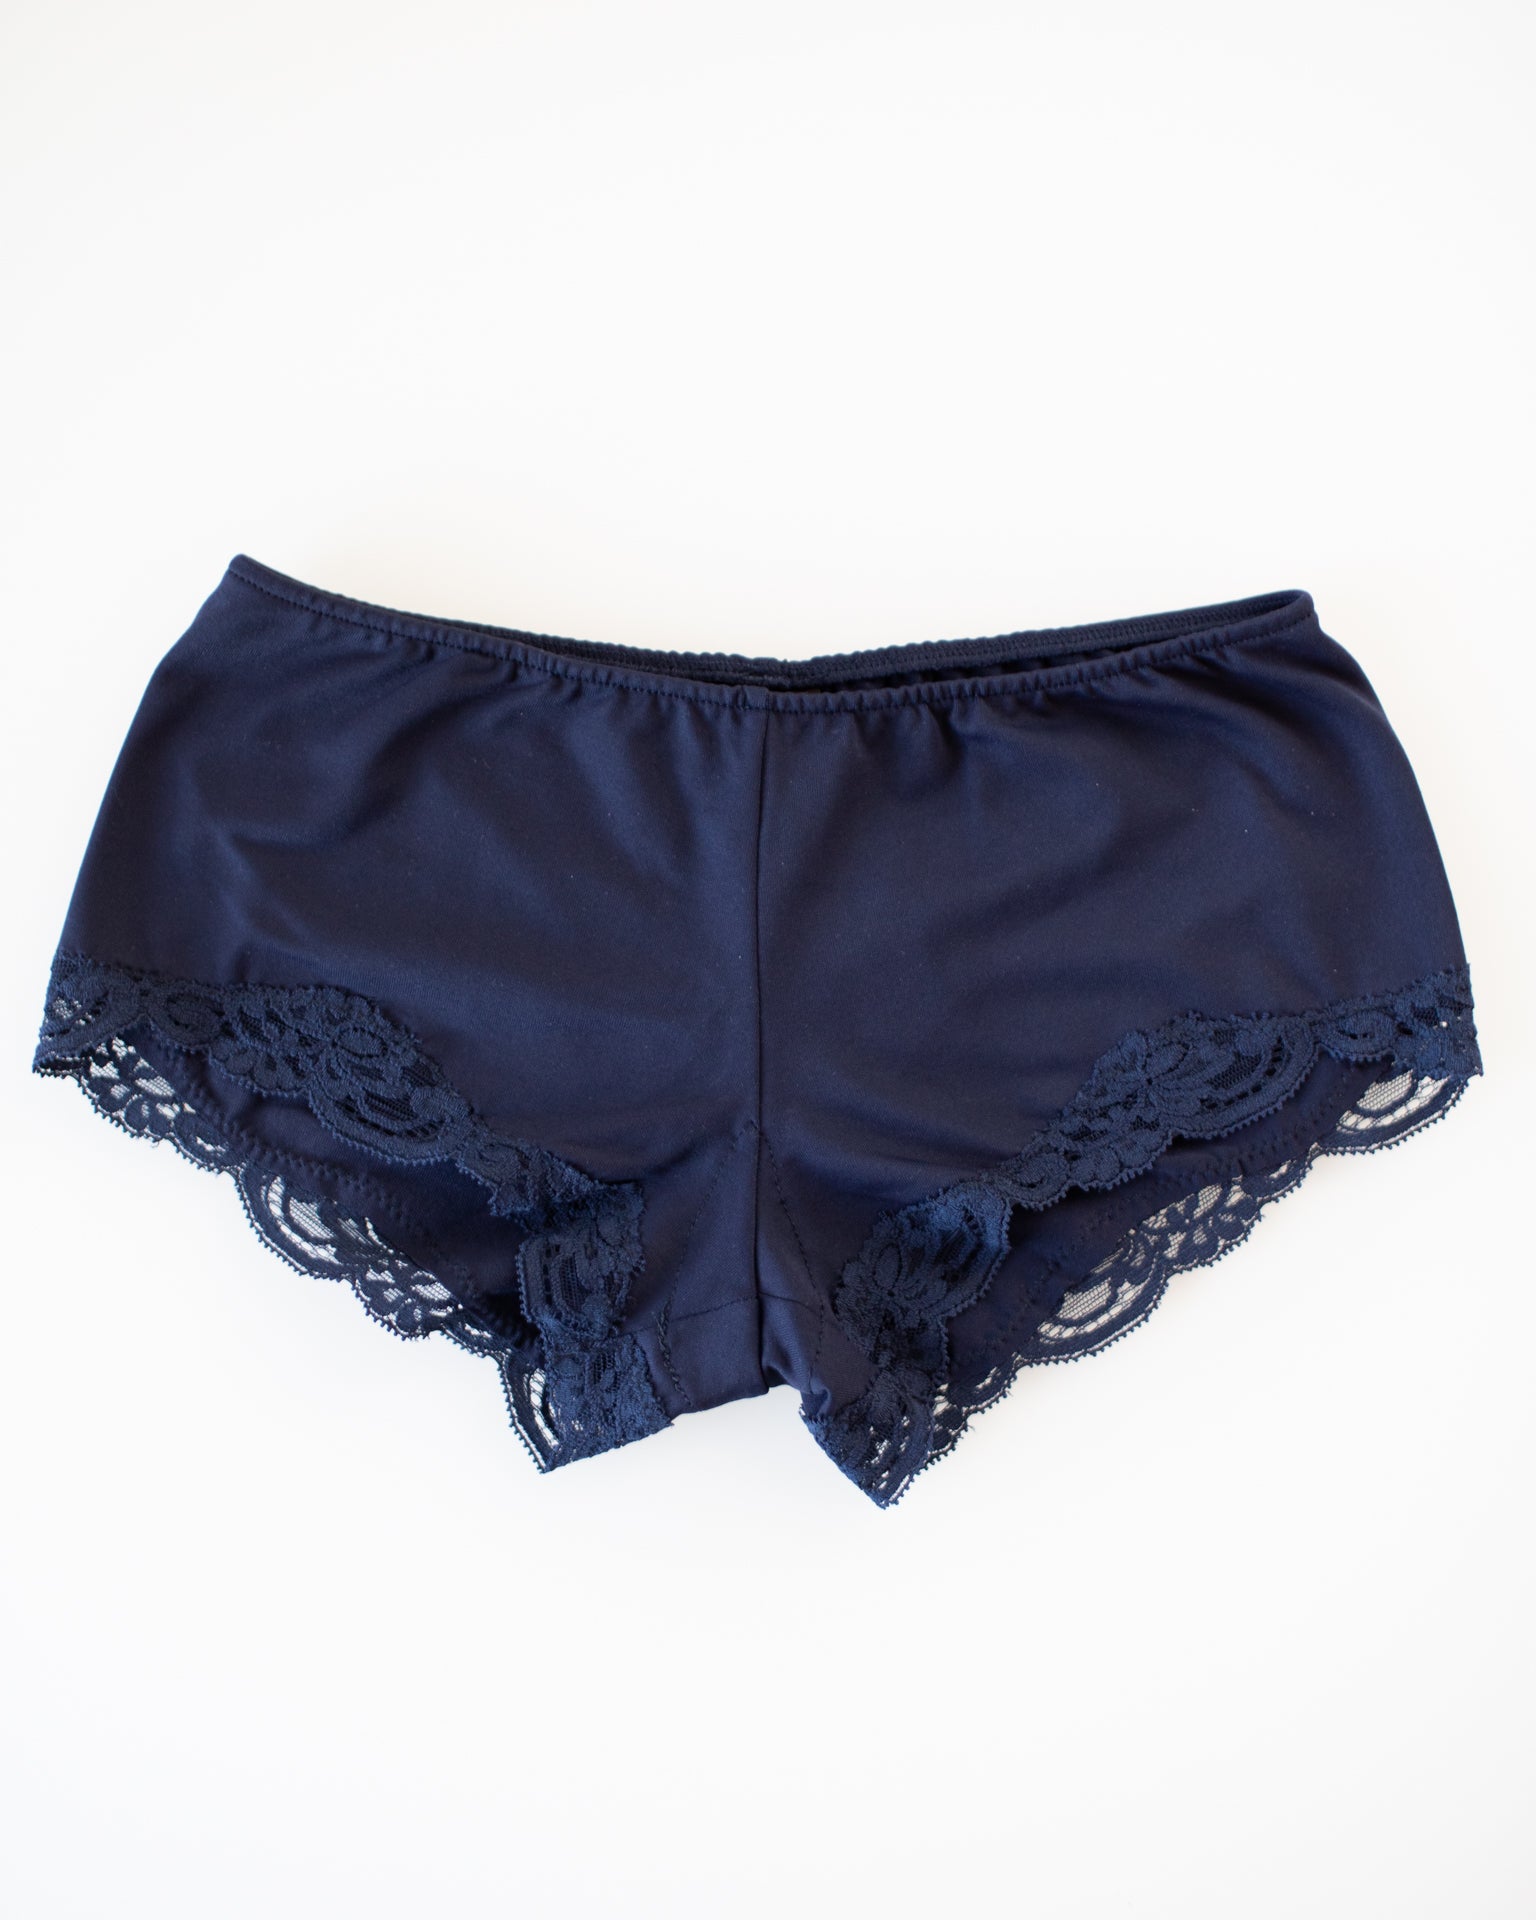 Del w/ Lace Hipster in Navy